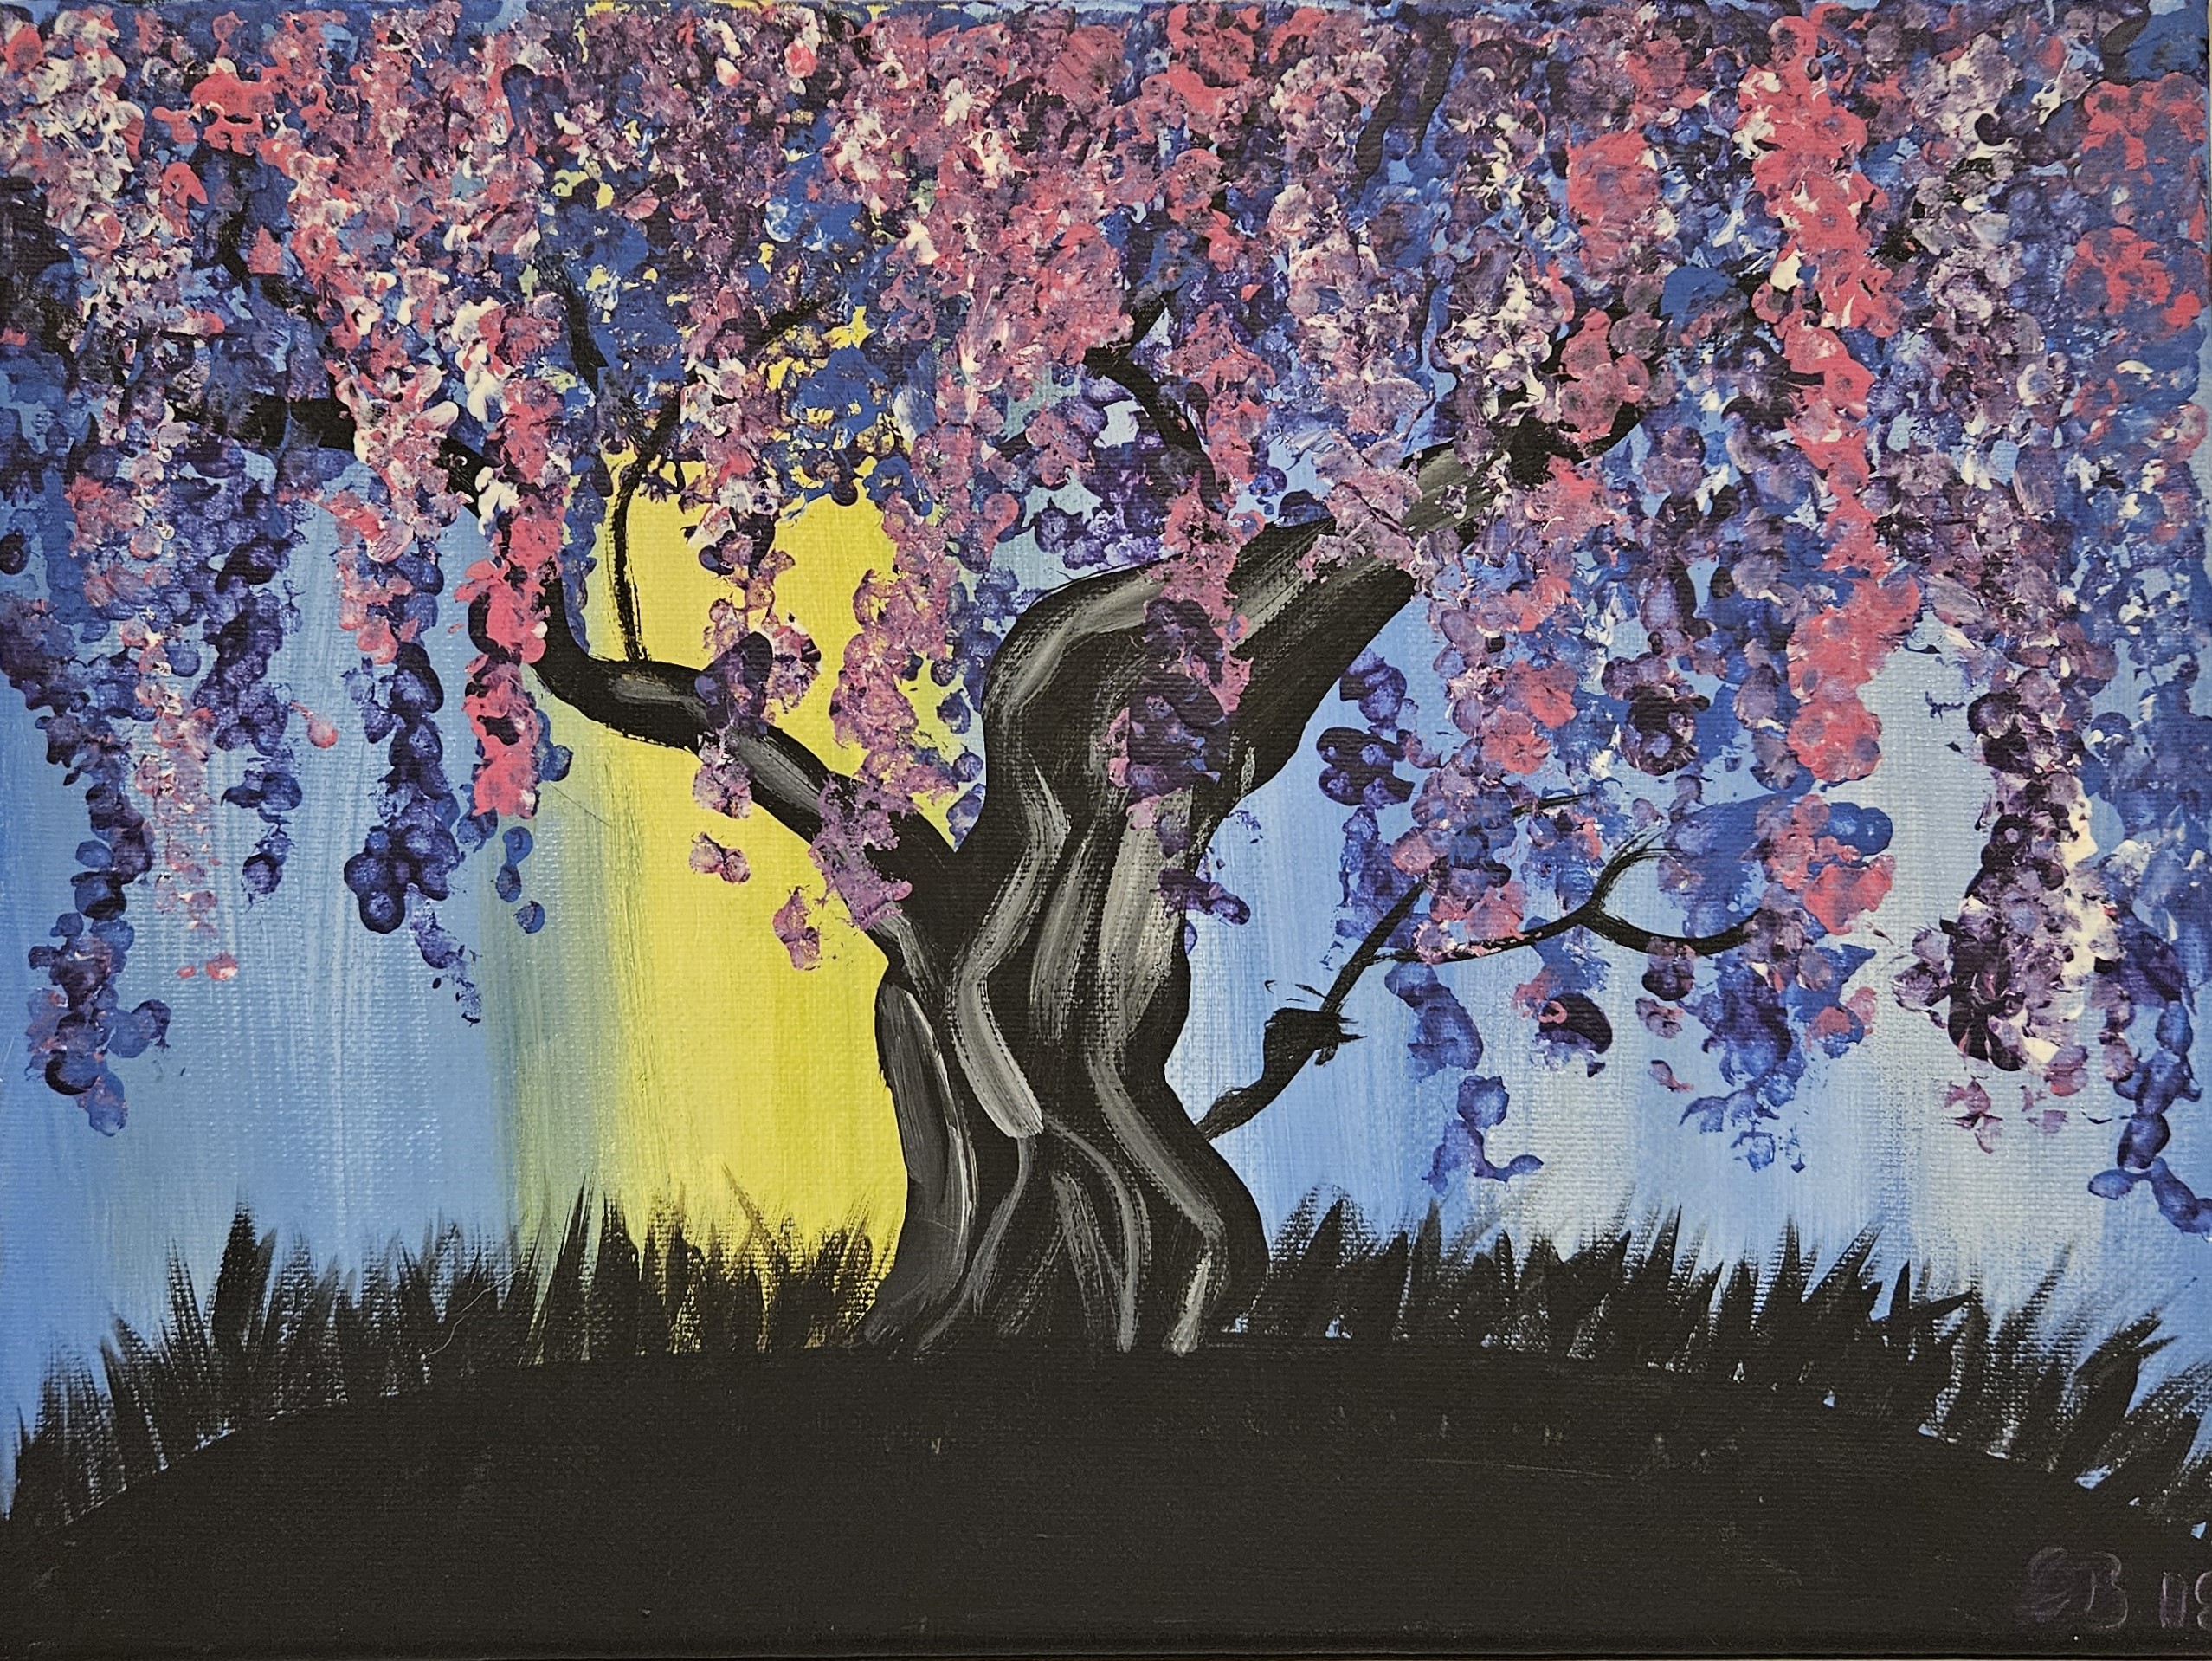 A painting of a wisteria willow tree. The tree has purple blooms of various shades. The ground and the trunk of the tree are black with detailing using silhouette or outlining wood grains in a lighter colour. The background is blue with a vertical yellow streak of light.